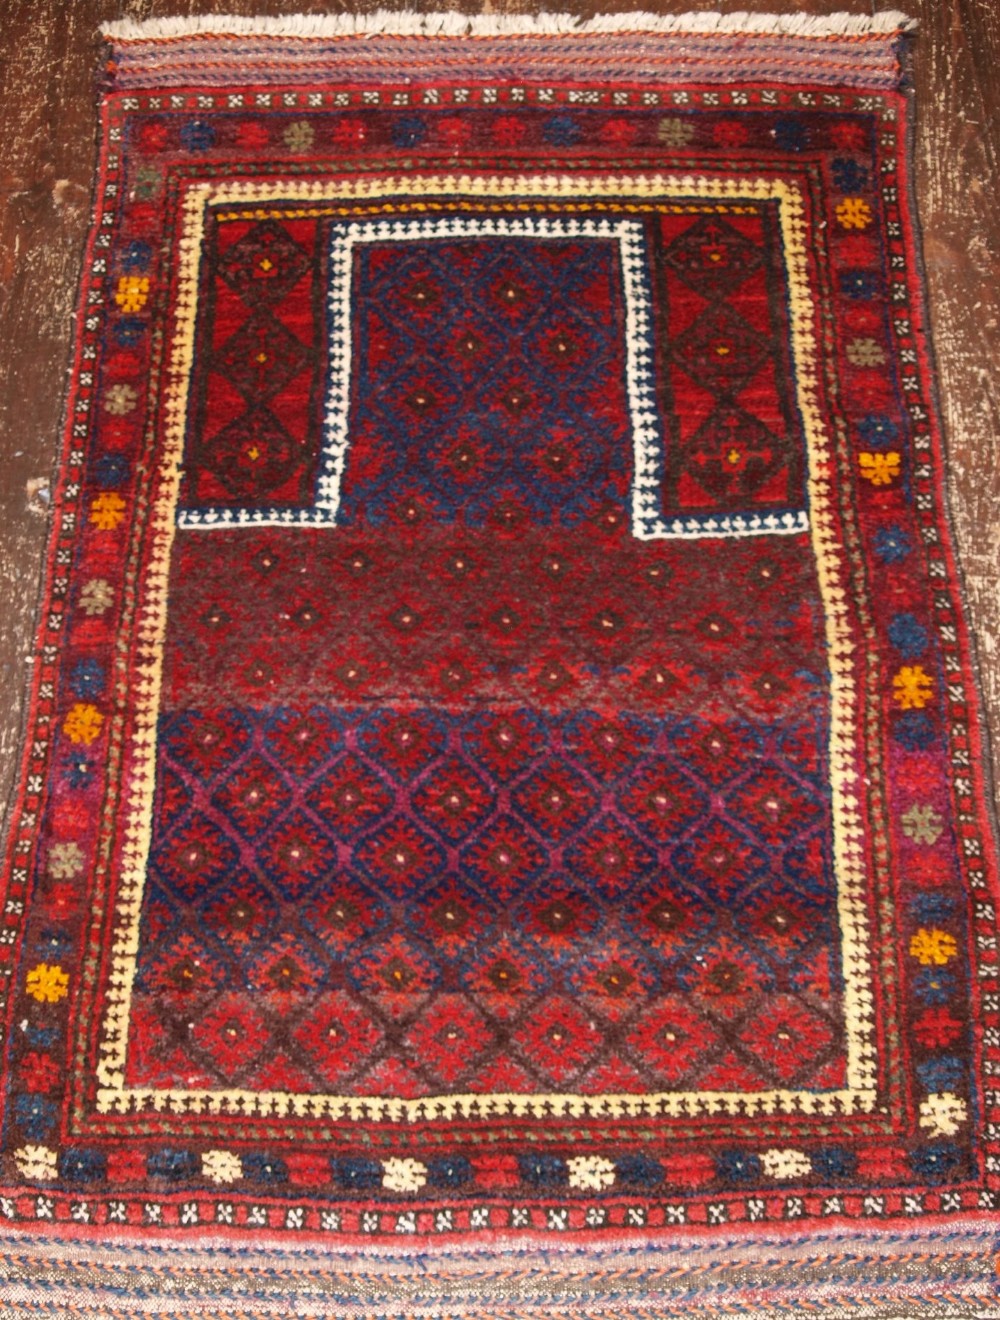 old afghan prayer rug with great colour design about 60 years old